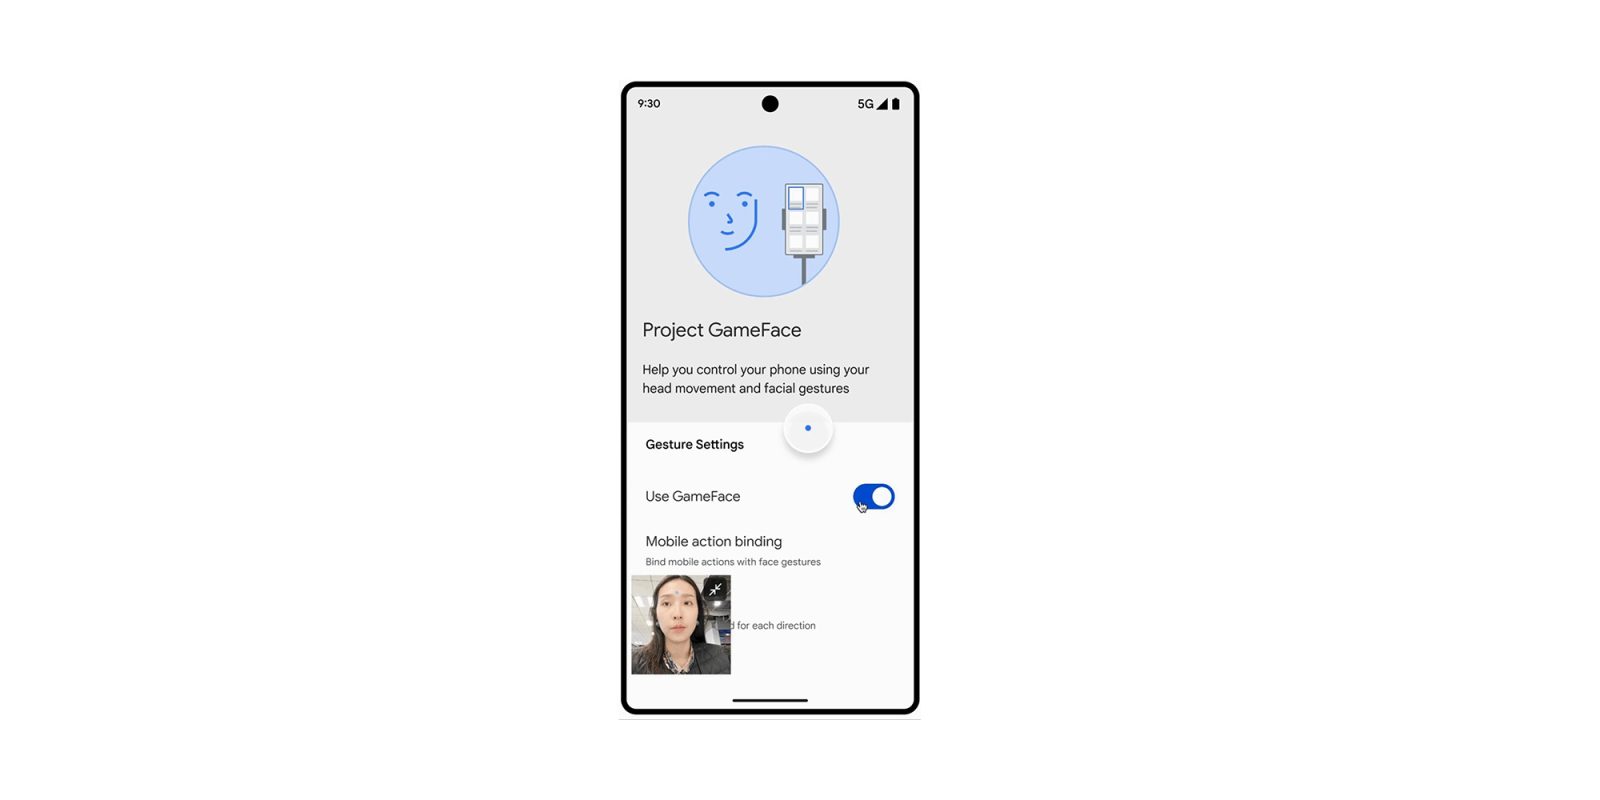 Google’s ‘Project Gameface’ can now bring facial gesture controls to Android